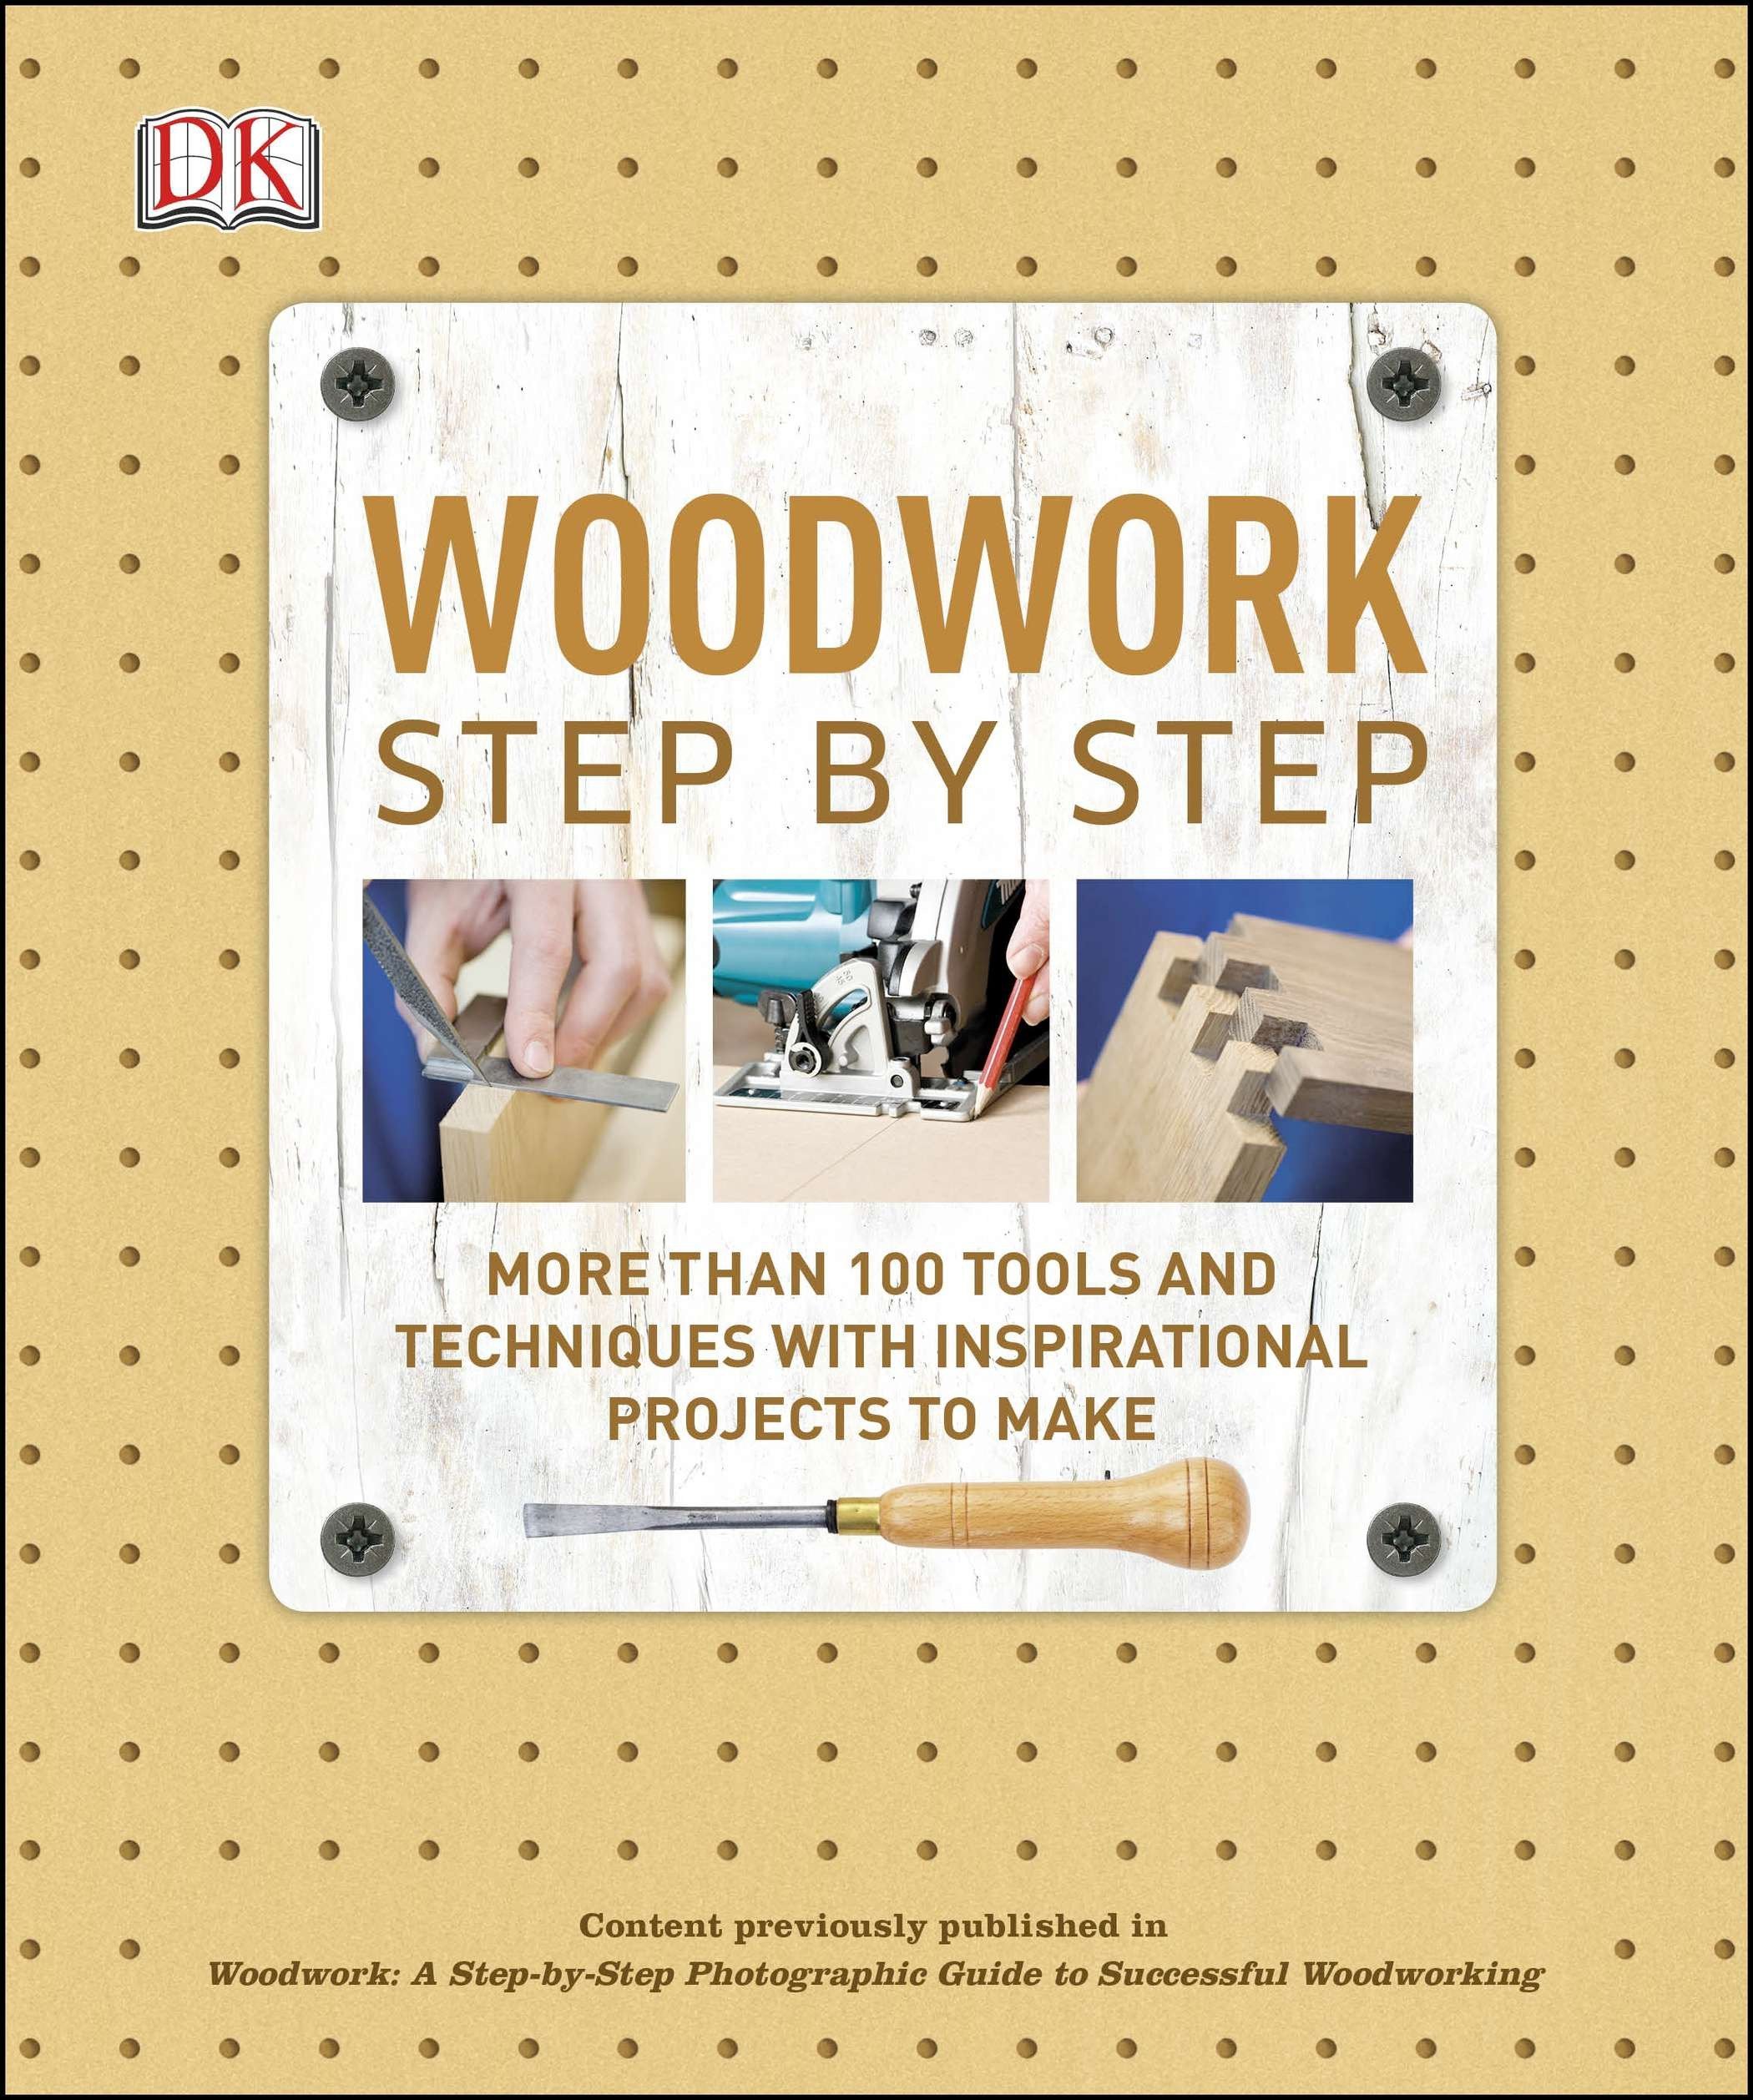 woodwork step by step: more than 100 tools and techniques with inspirational projects to make by alan bridgewater